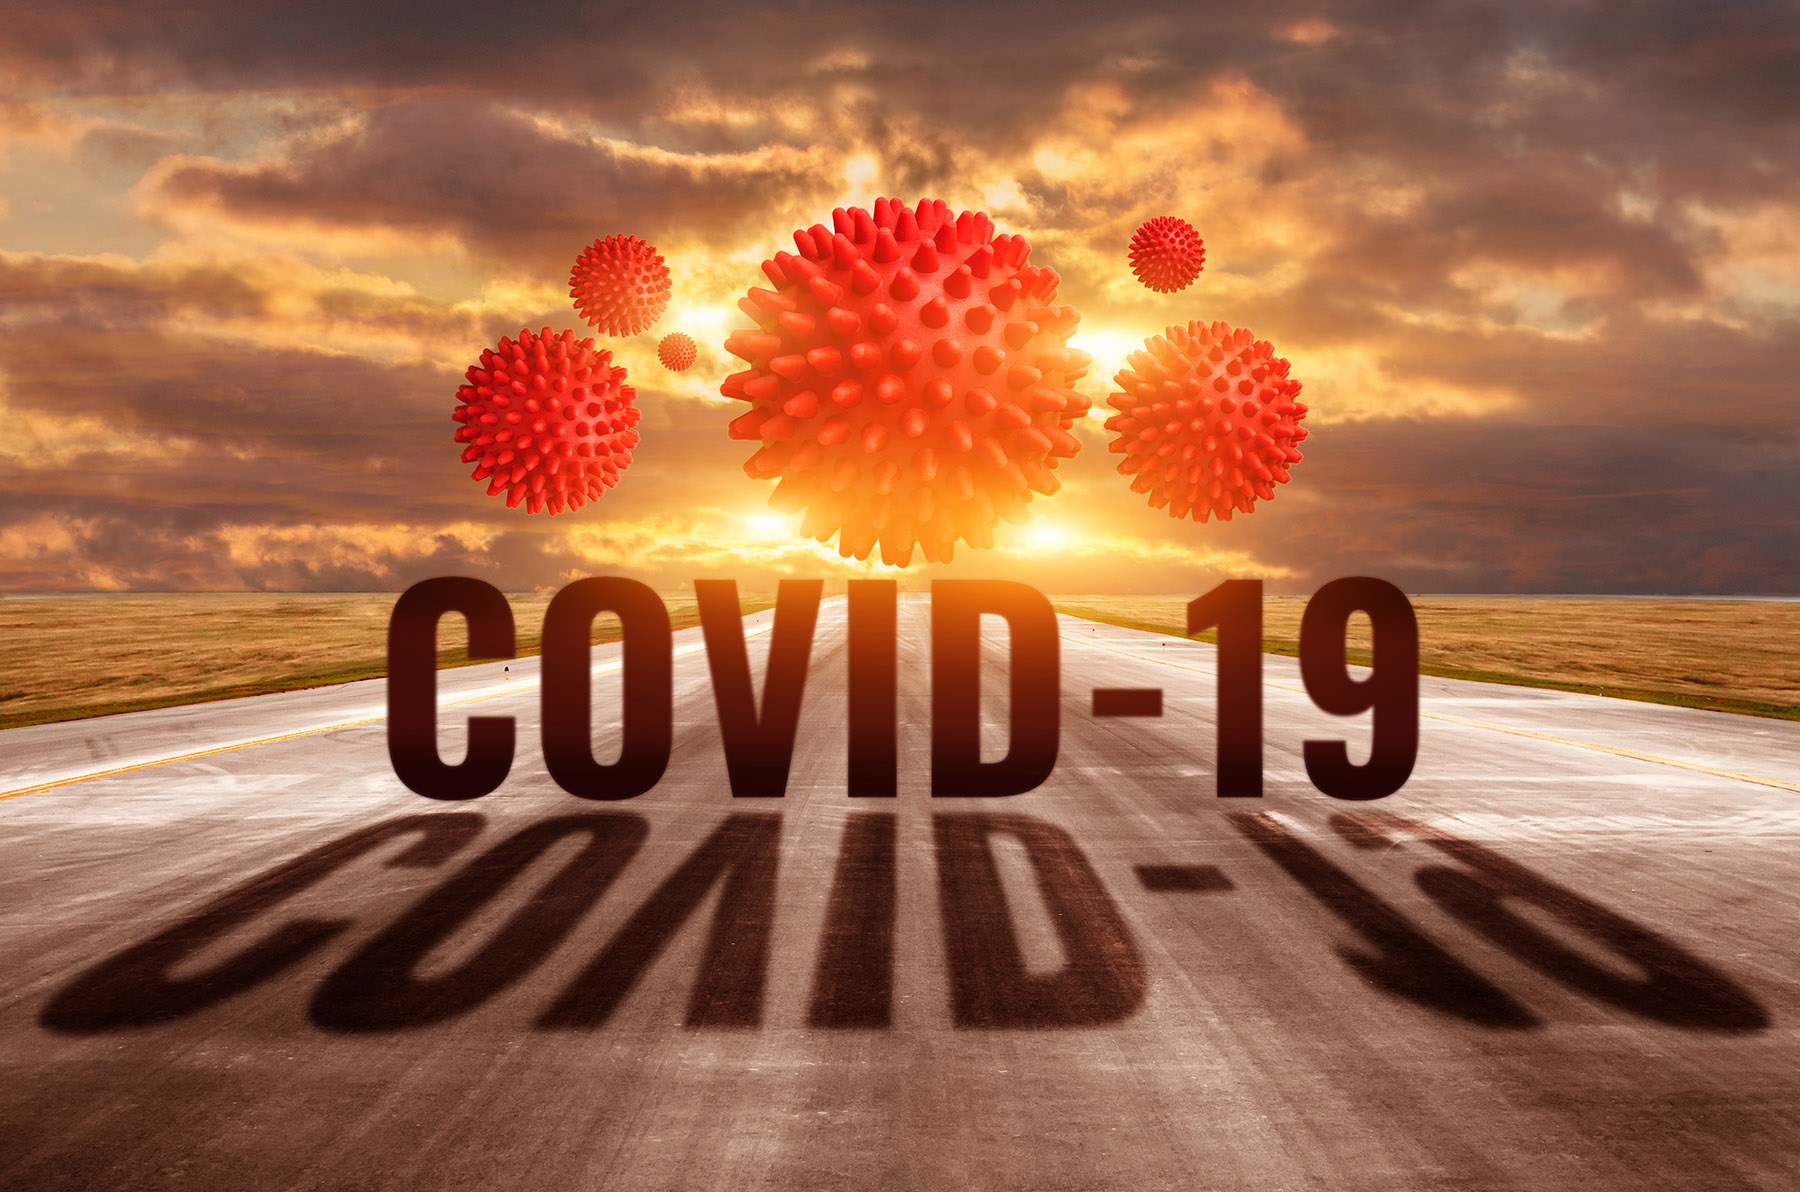 COVID-19 virus in the road